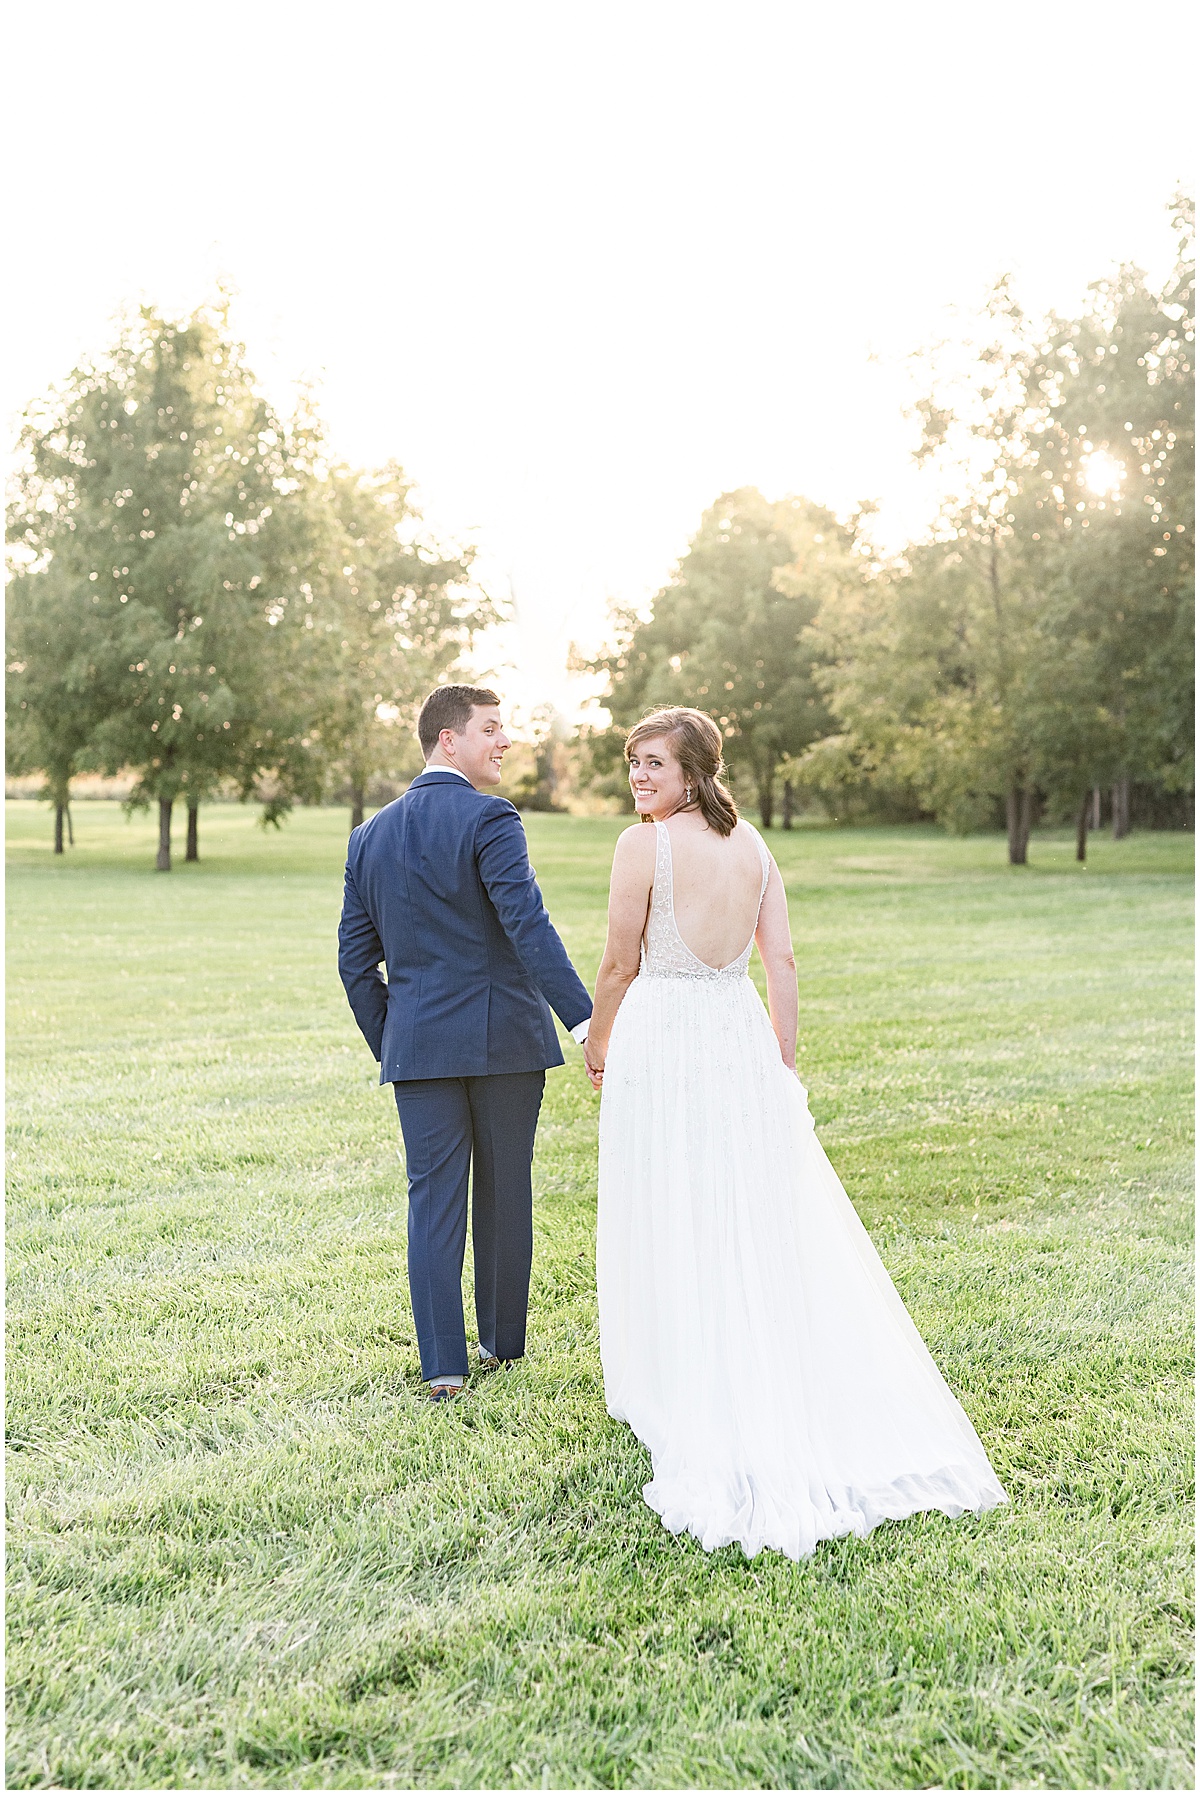 Sunset photos after wedding at The Sixpence in Whitestown, Indiana photographed by Indianapolis wedding photographer Victoria Rayburn